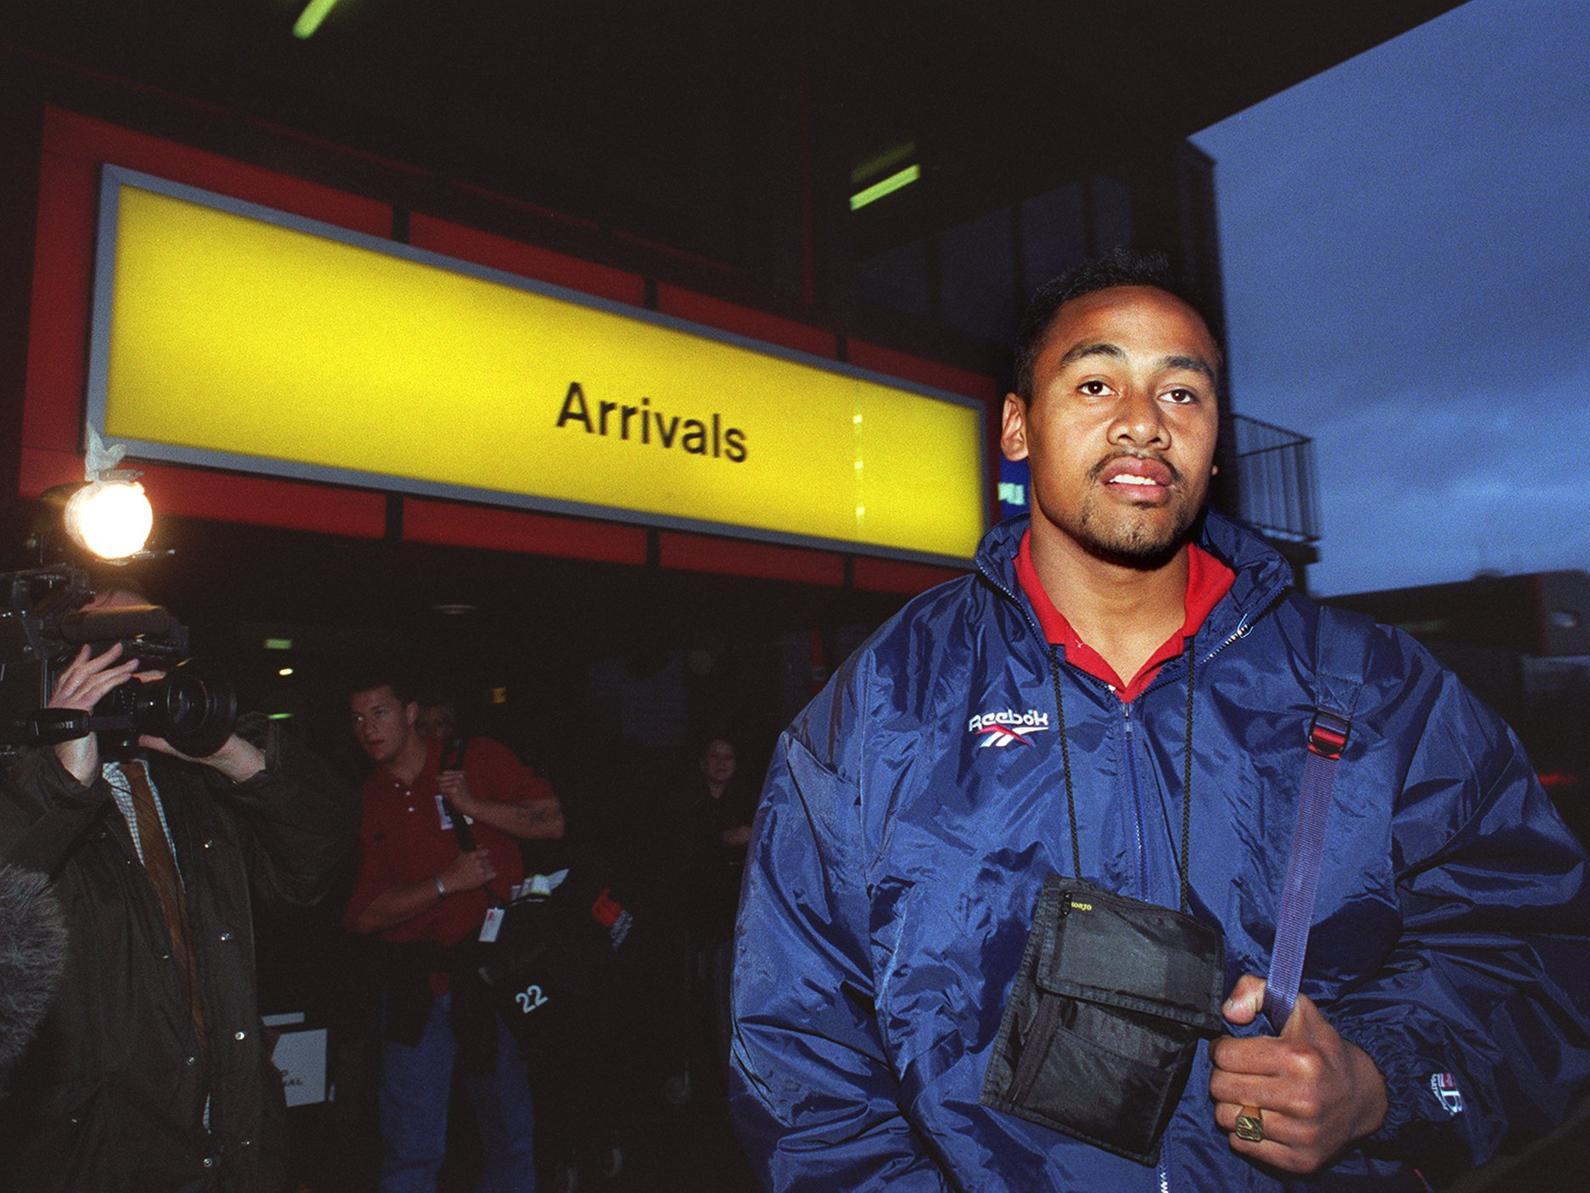 New Zealand All Black rugby winger Jonah Lumo arriving at Leeds Bradford Airport